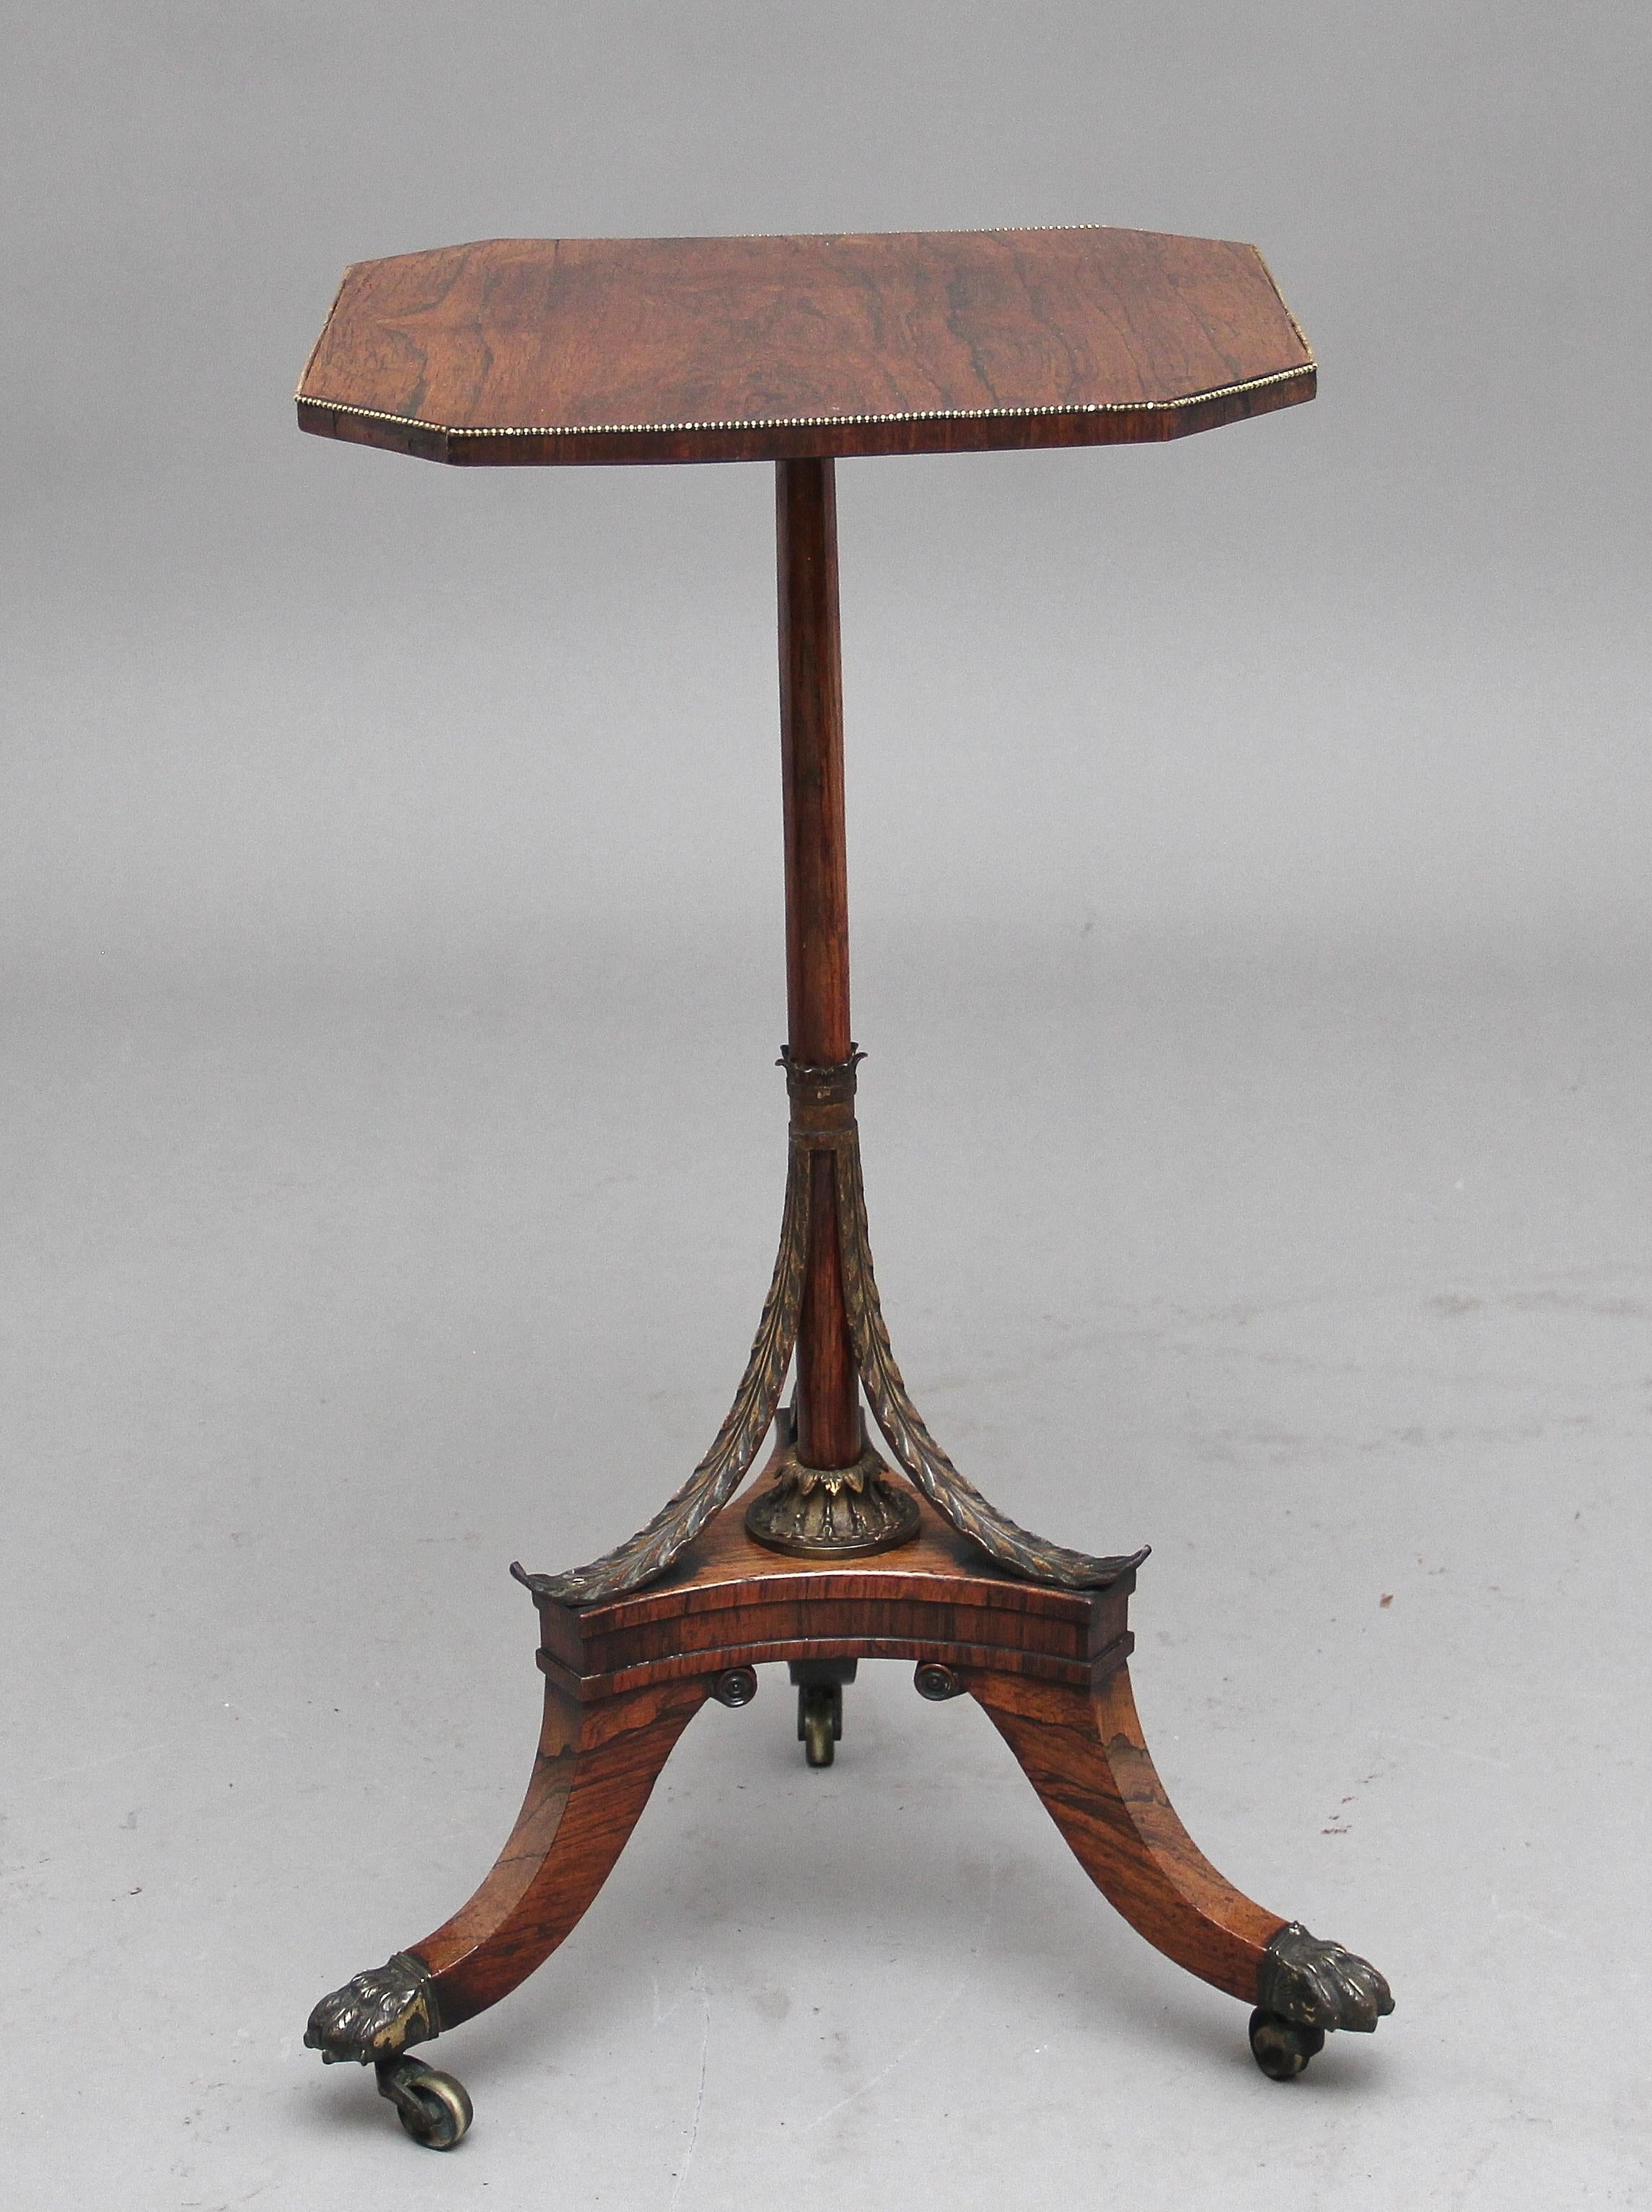 A decorative 19th century rosewood occasional table, having a lovely figured shape top with brass beading around the edge, supported on a finely turned column with gilt metal leaf decoration, tri platform base with three splay legs terminating on